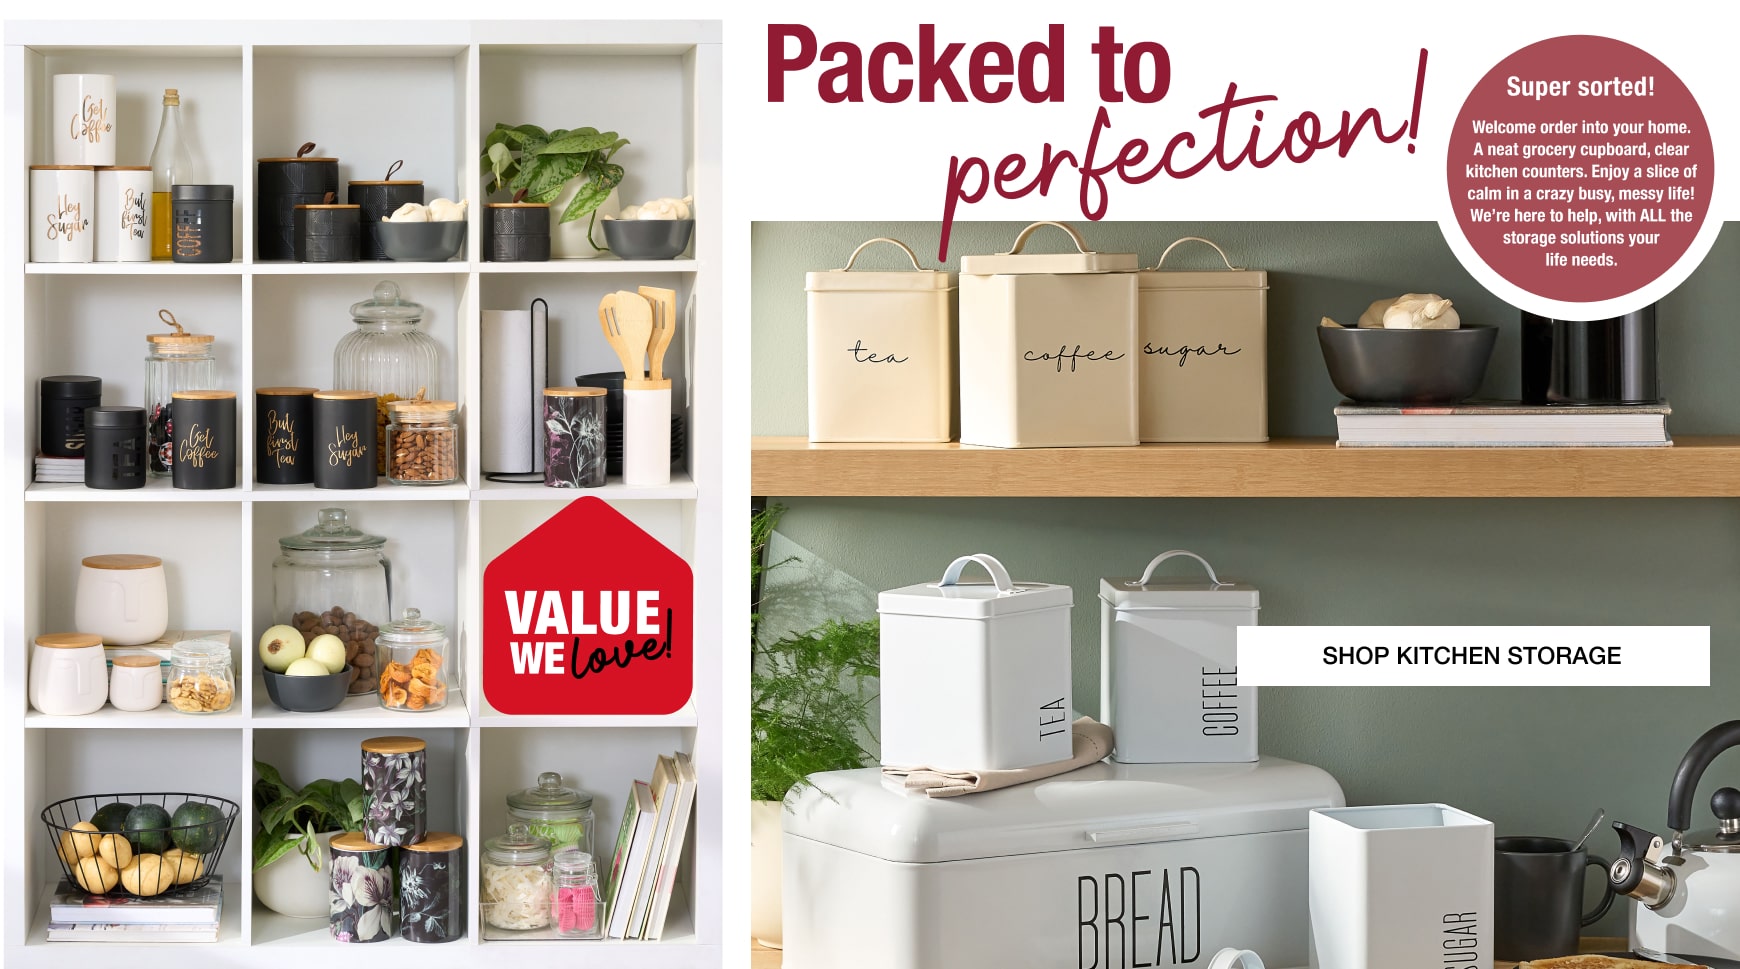 packed to perfection. All the storage solutions your life needs